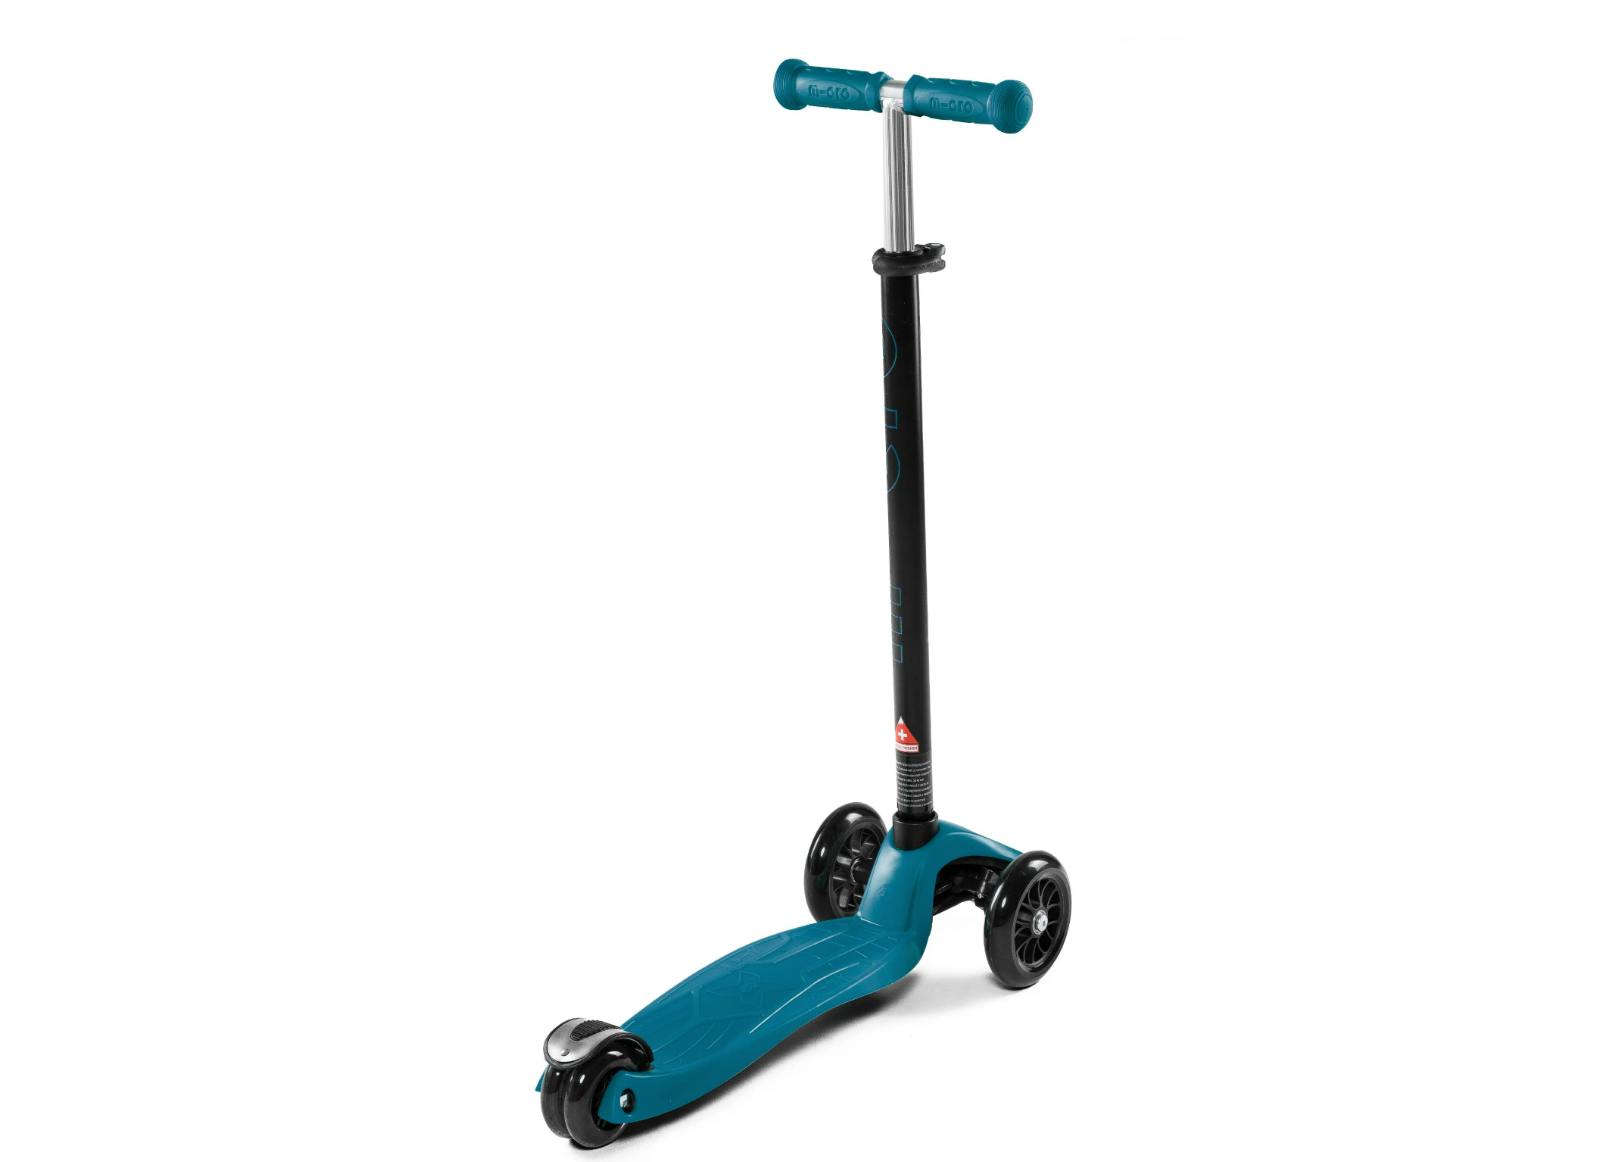 The Micro Kickboard Maxi Deluxe Foldable LED Scooter.